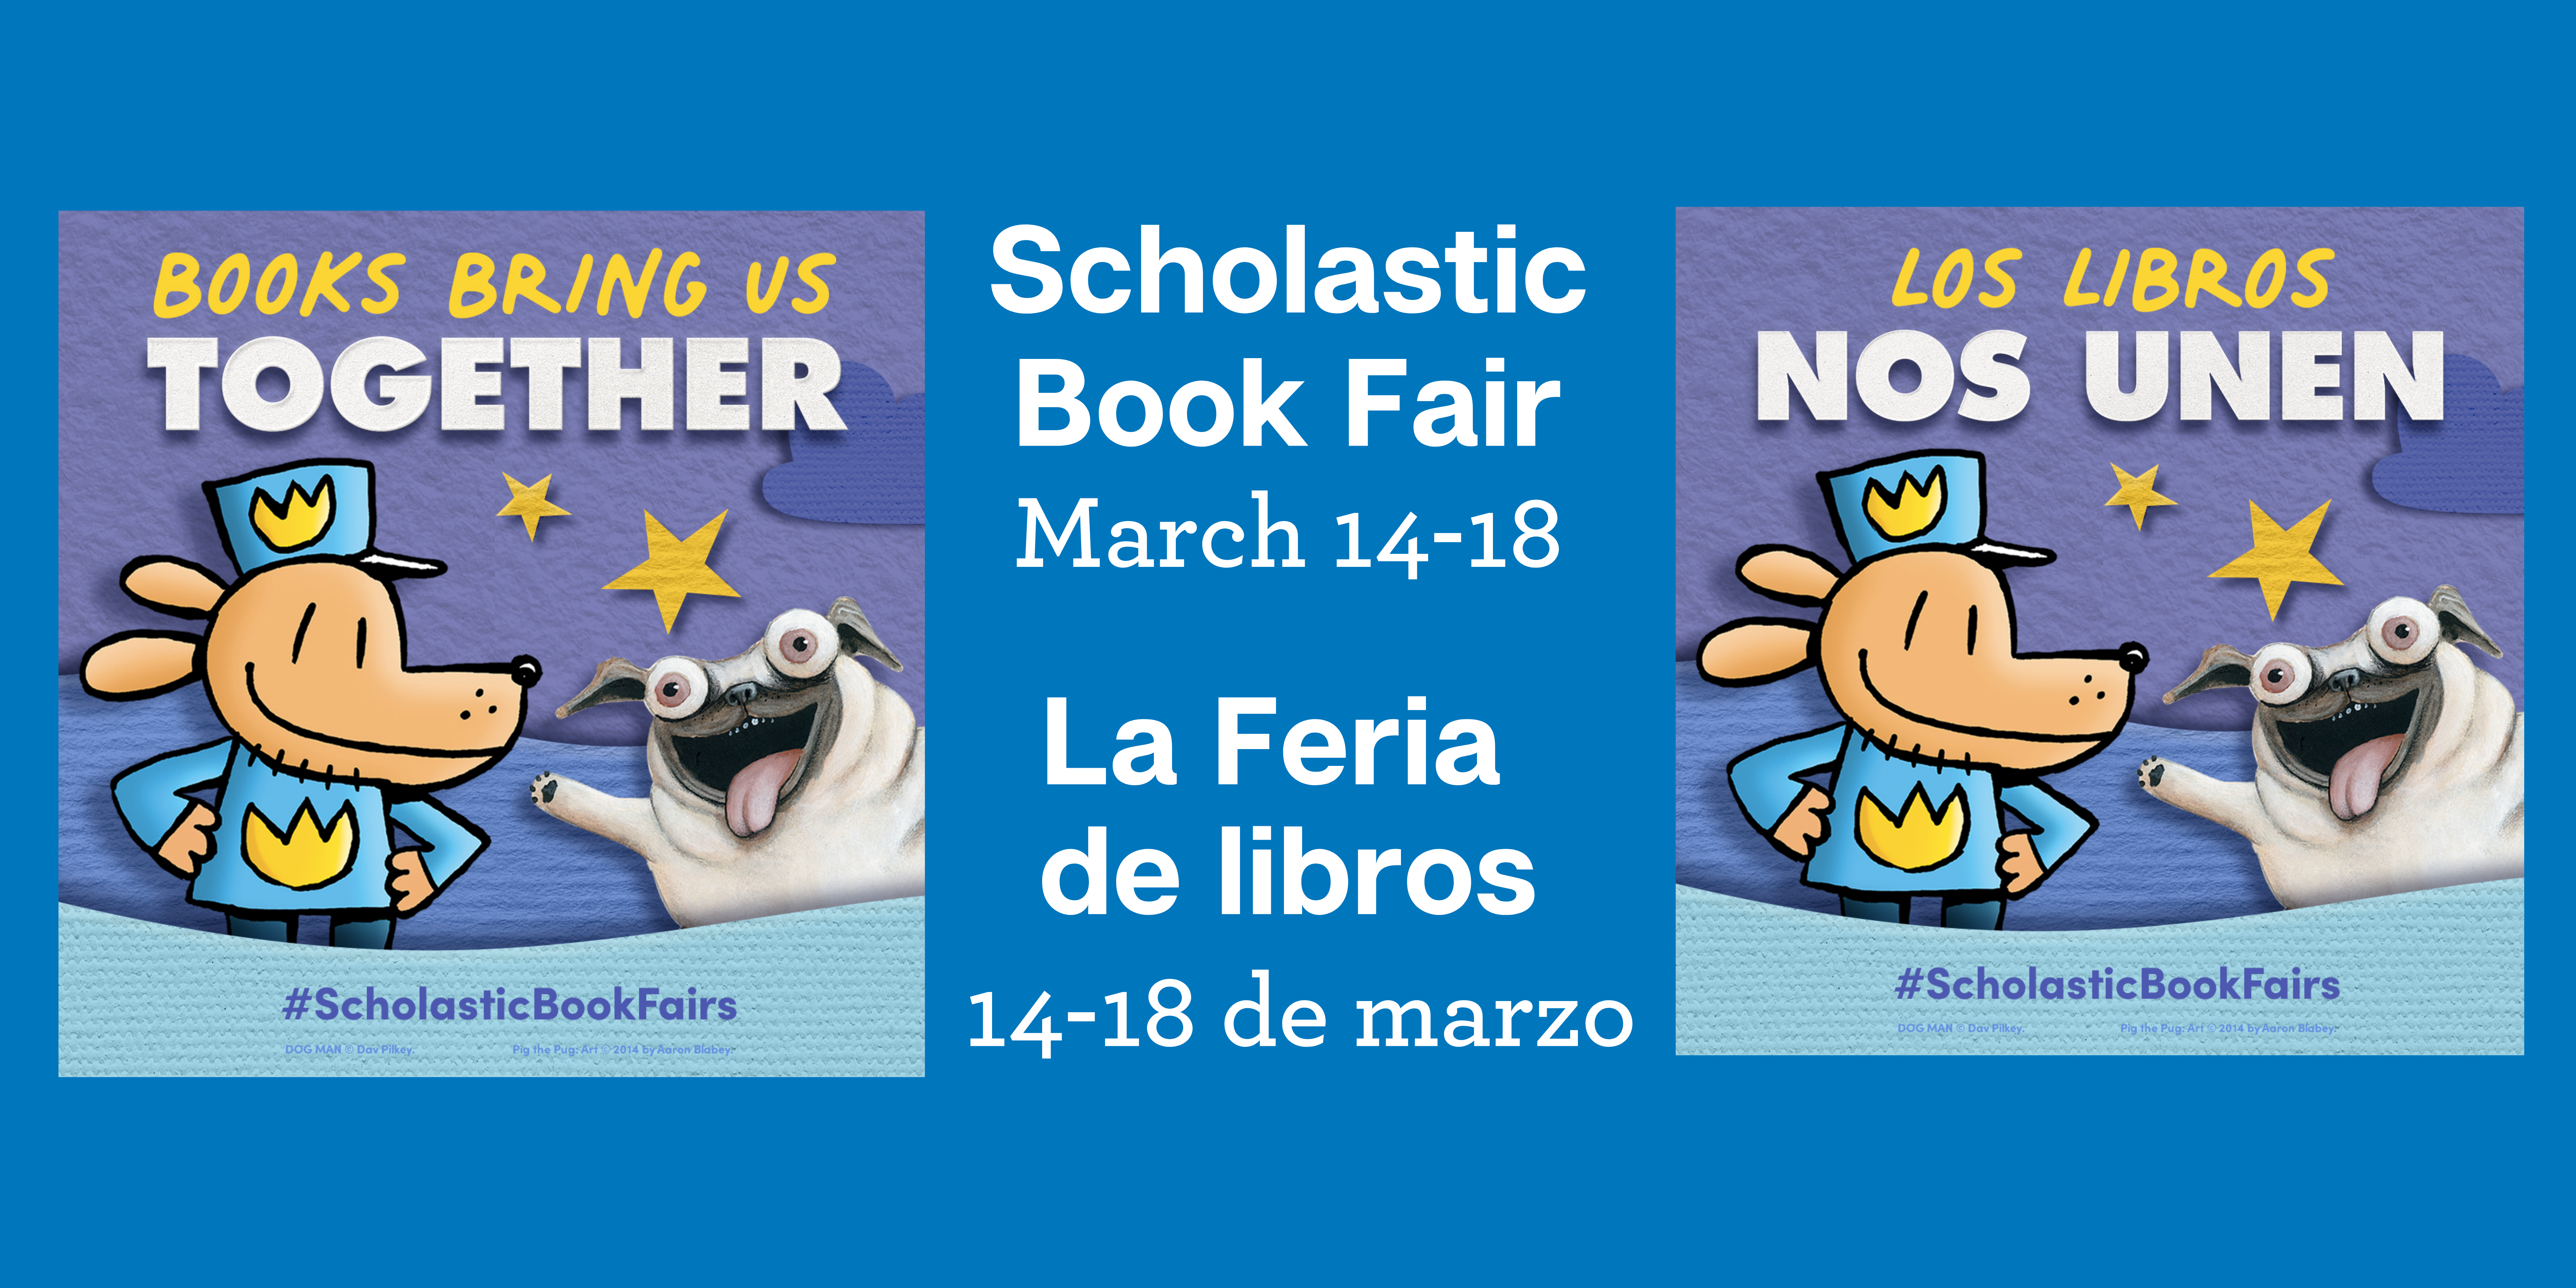 Blue background with image of 2 dogs and words "Book Bring Us Together" in English and Spanish. Yellow text says "Scholastic Book Fair, March 14-18."